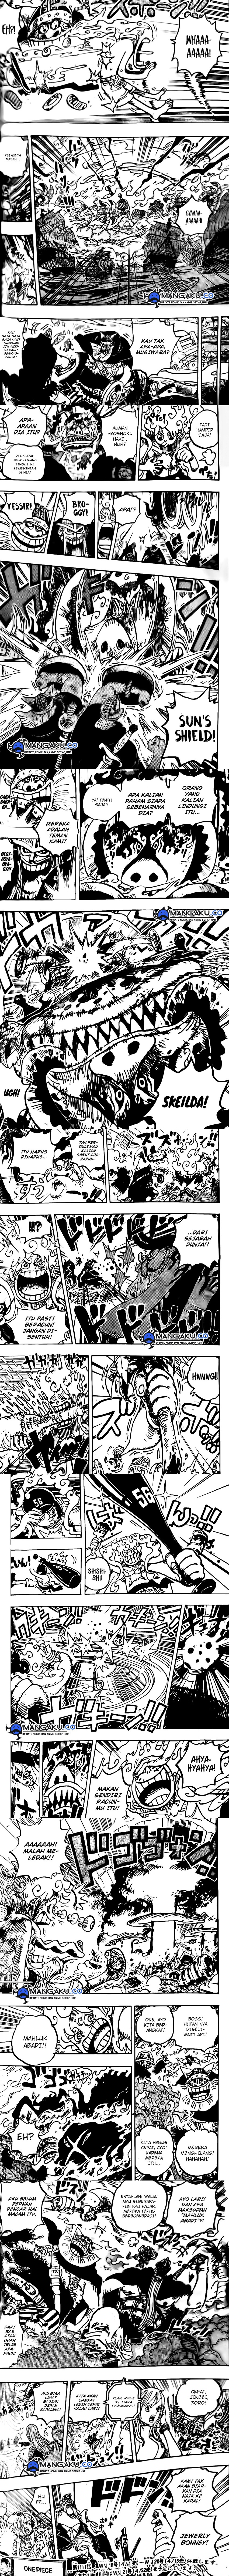 One Piece Chapter 1111 Image 2